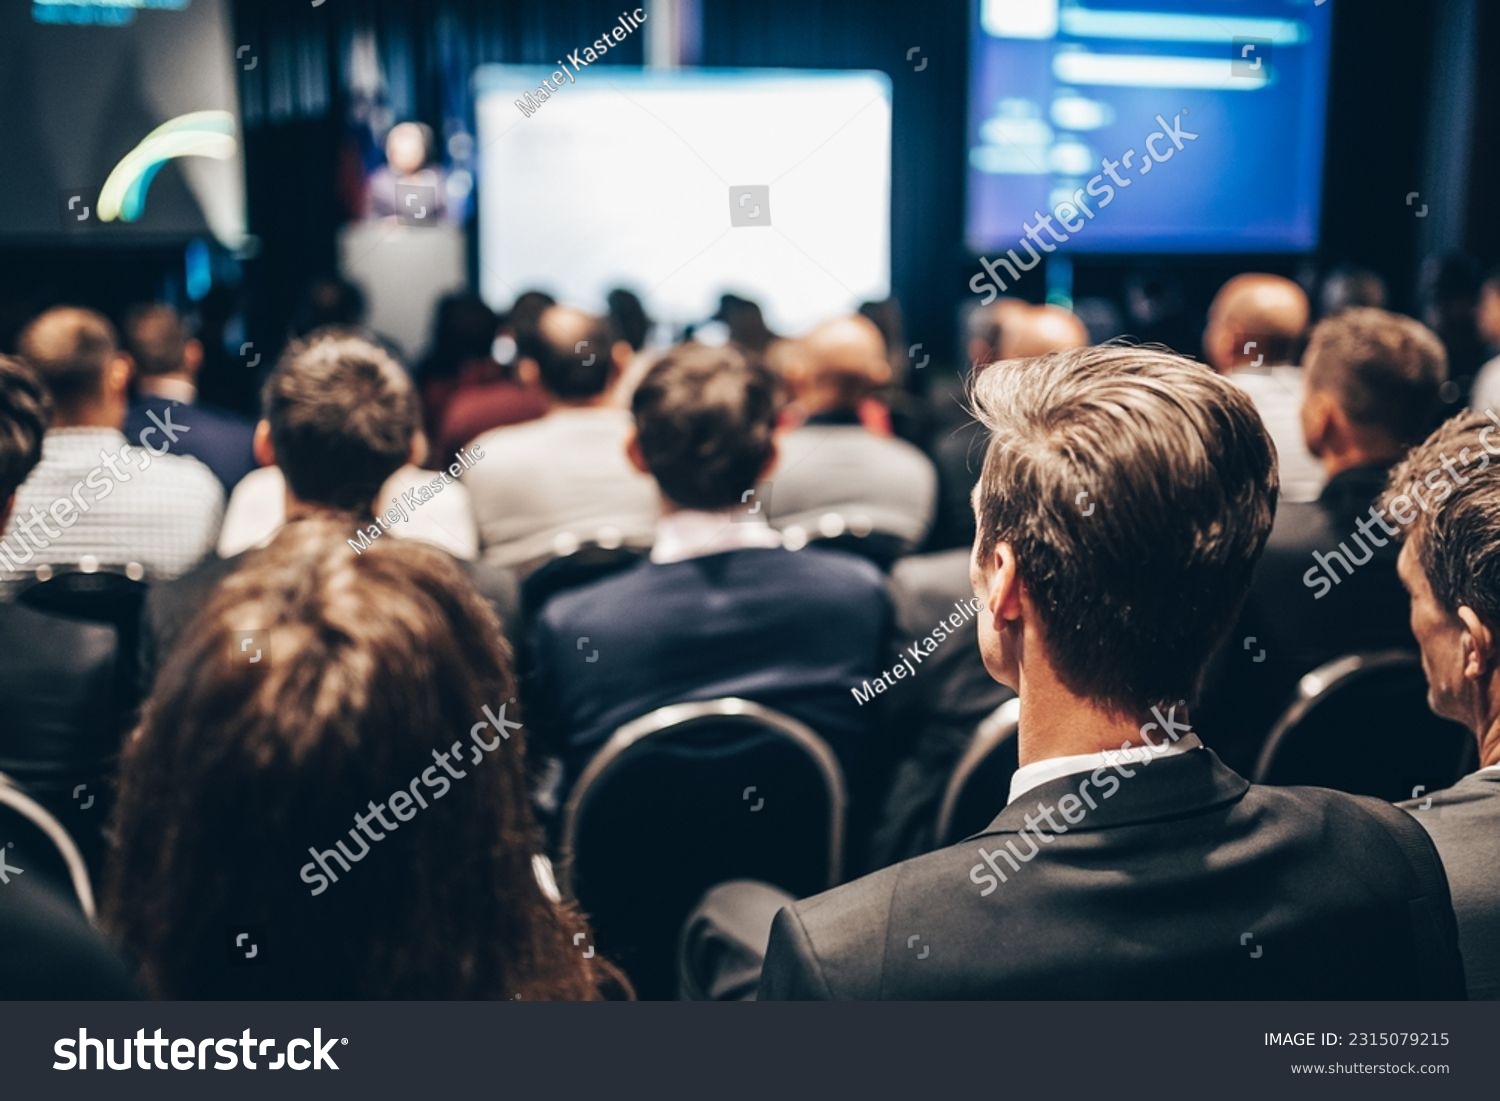 Speaker giving a talk in conference hall at business event. Rear view of unrecognizable people in audience at the conference hall. Business and entrepreneurship concept #2315079215